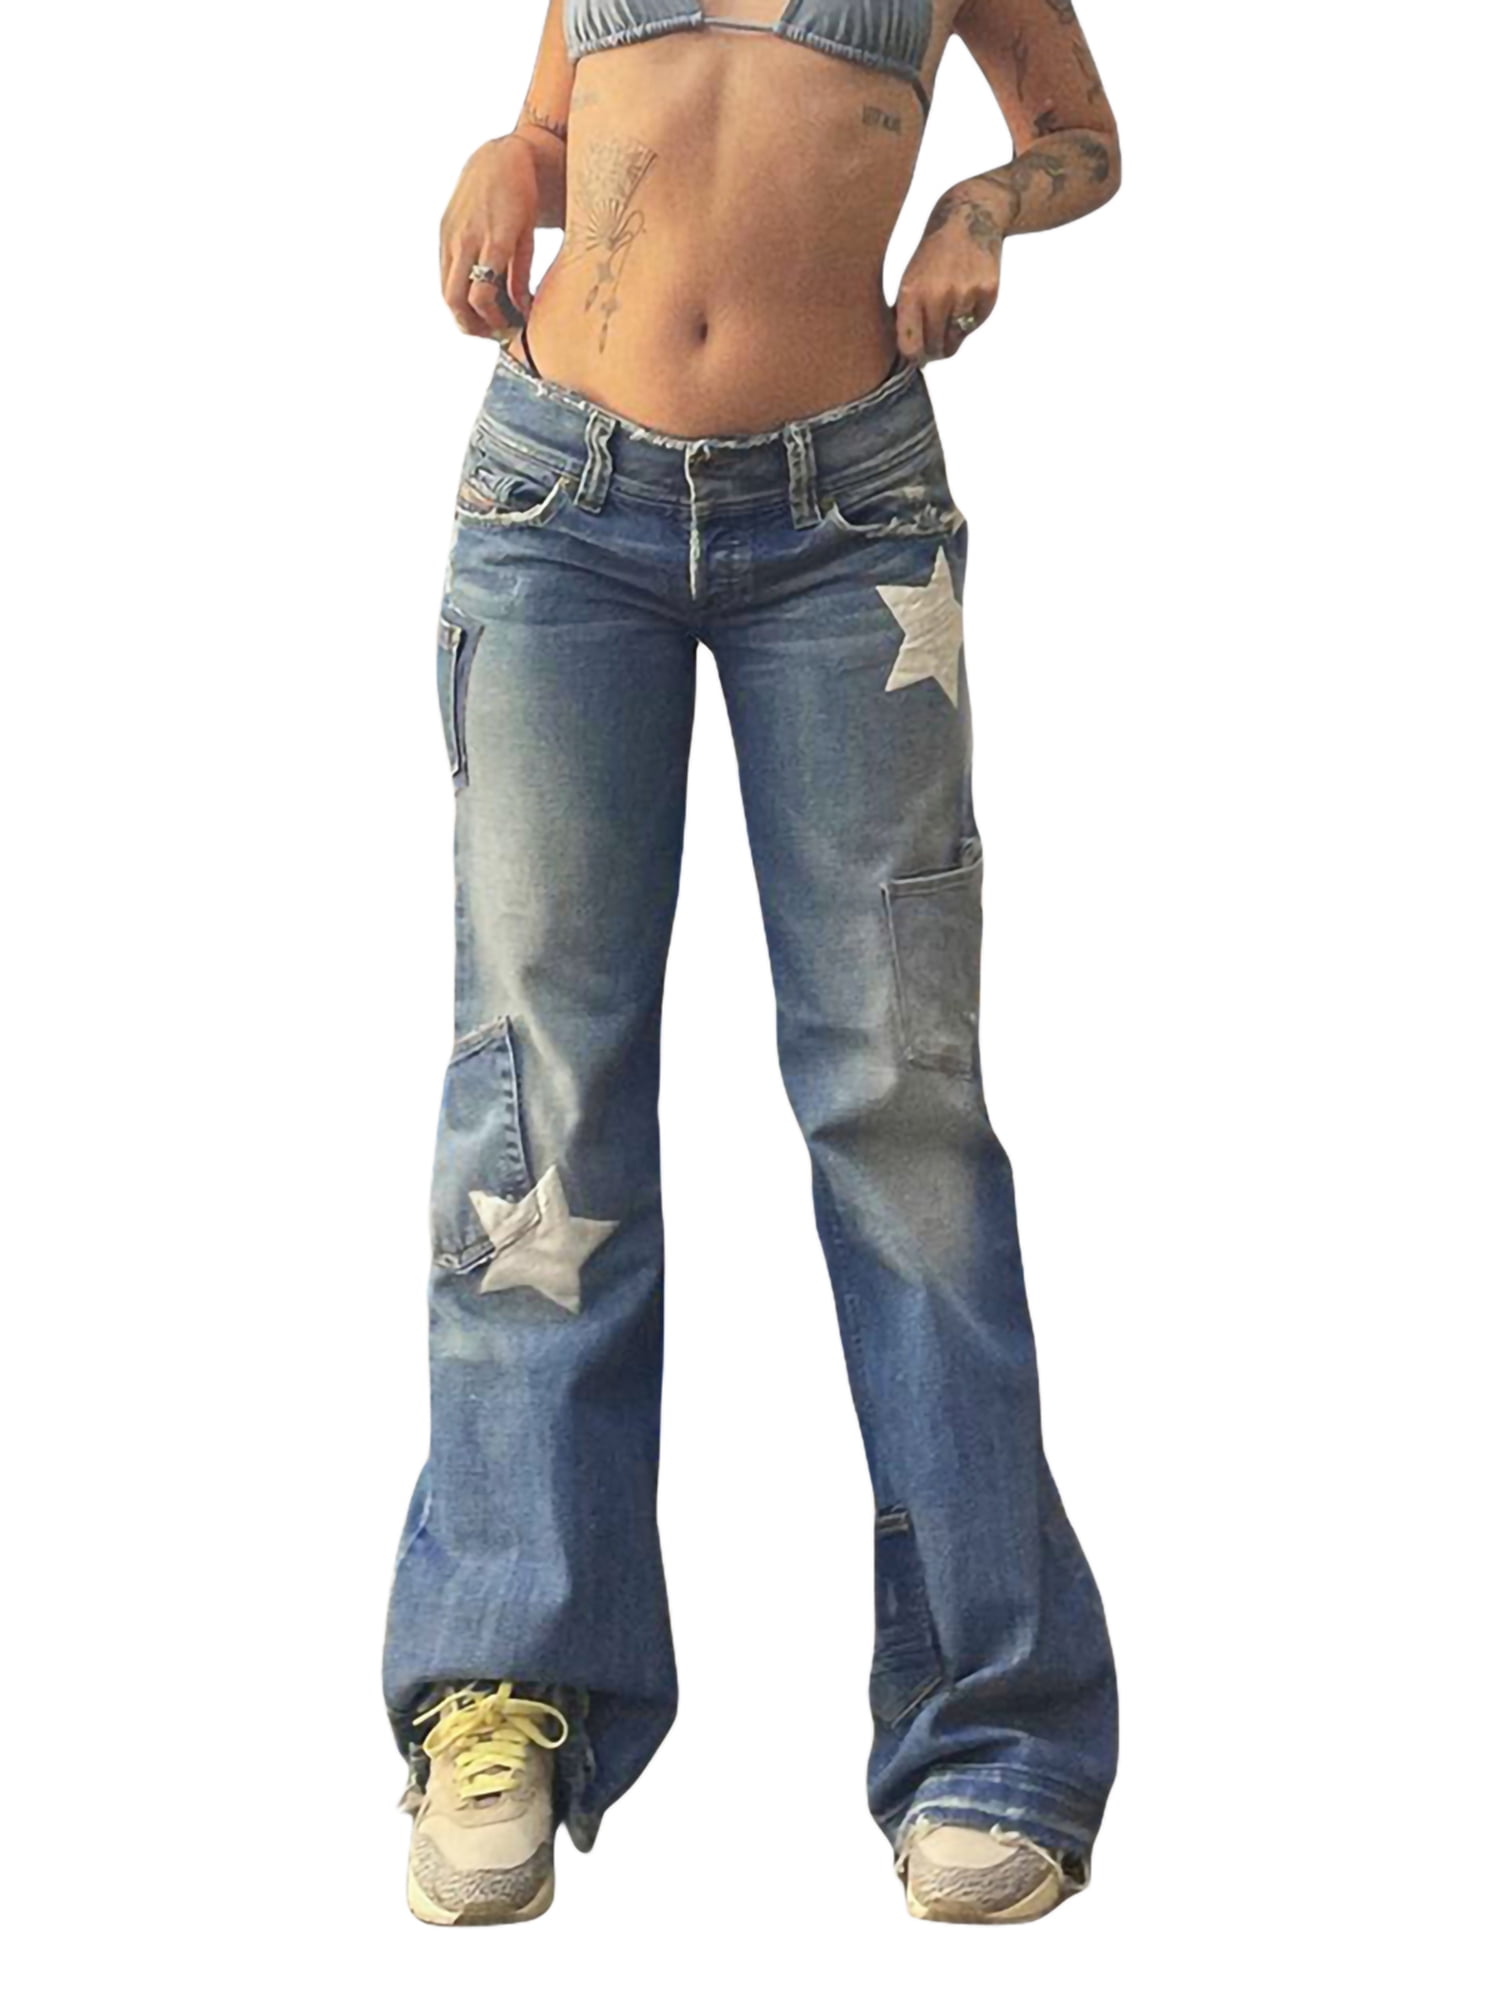 Low Rise Bell Bottom Jeans for Women Hippie Denim Pants 2000s Fashion  Gothic Bootcut Cargo Flare Jeans